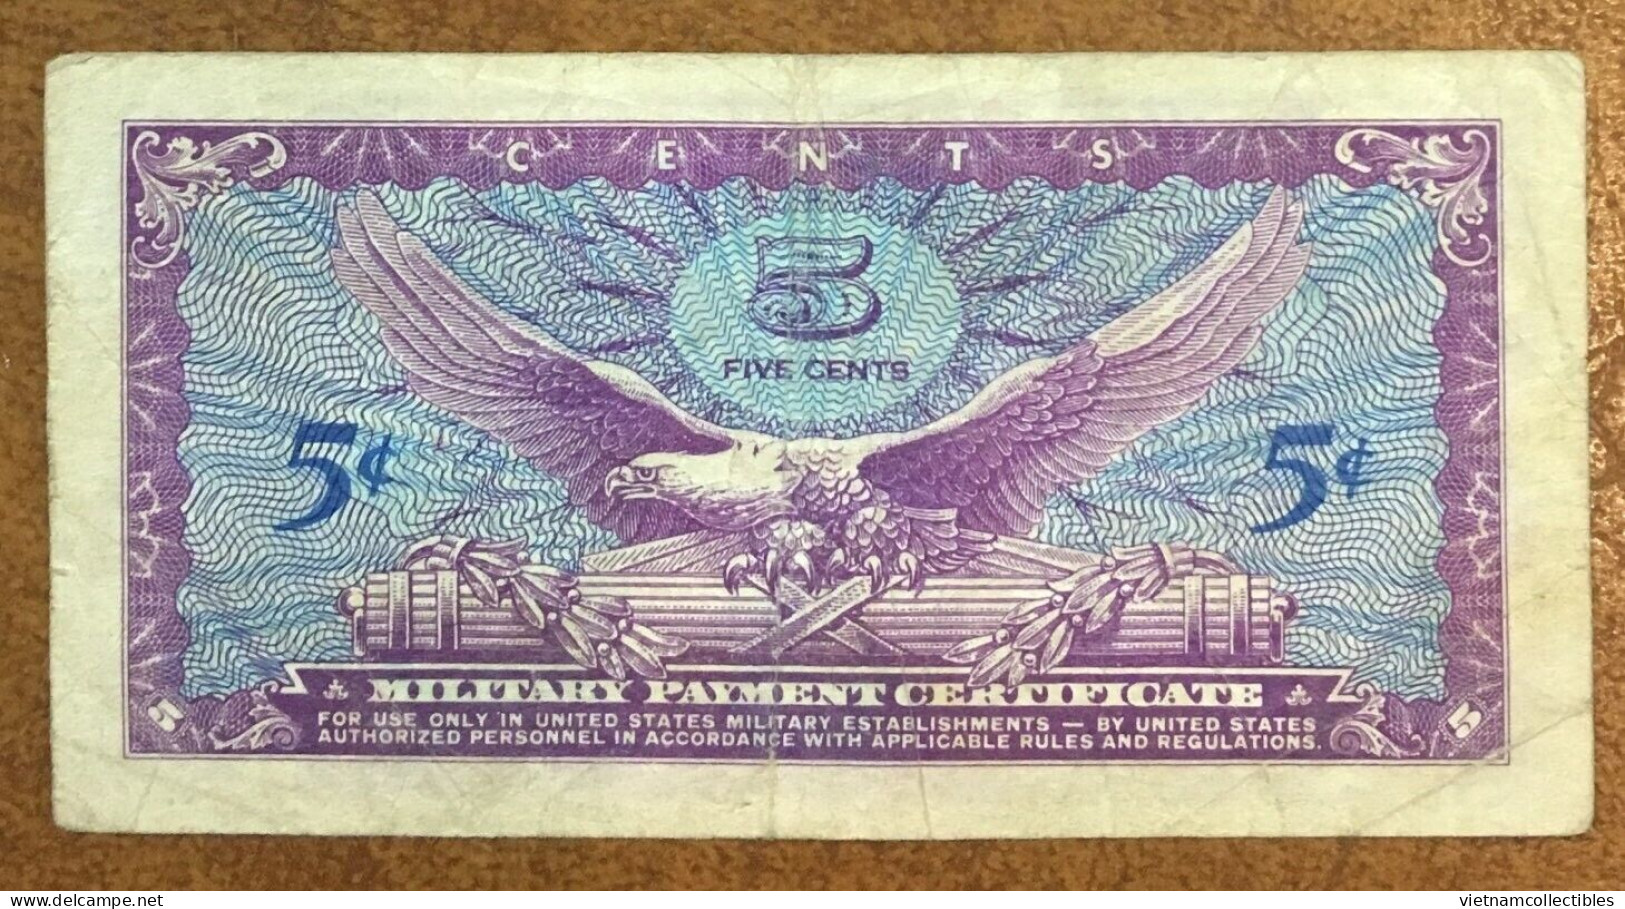 USA MPC 5 Cents Military Payment Series 641 VF Banknote Note 1964 Using In Vietnam Viet Nam - Plate # 1 / 2 Photos - 1965-1968 - Serie 641